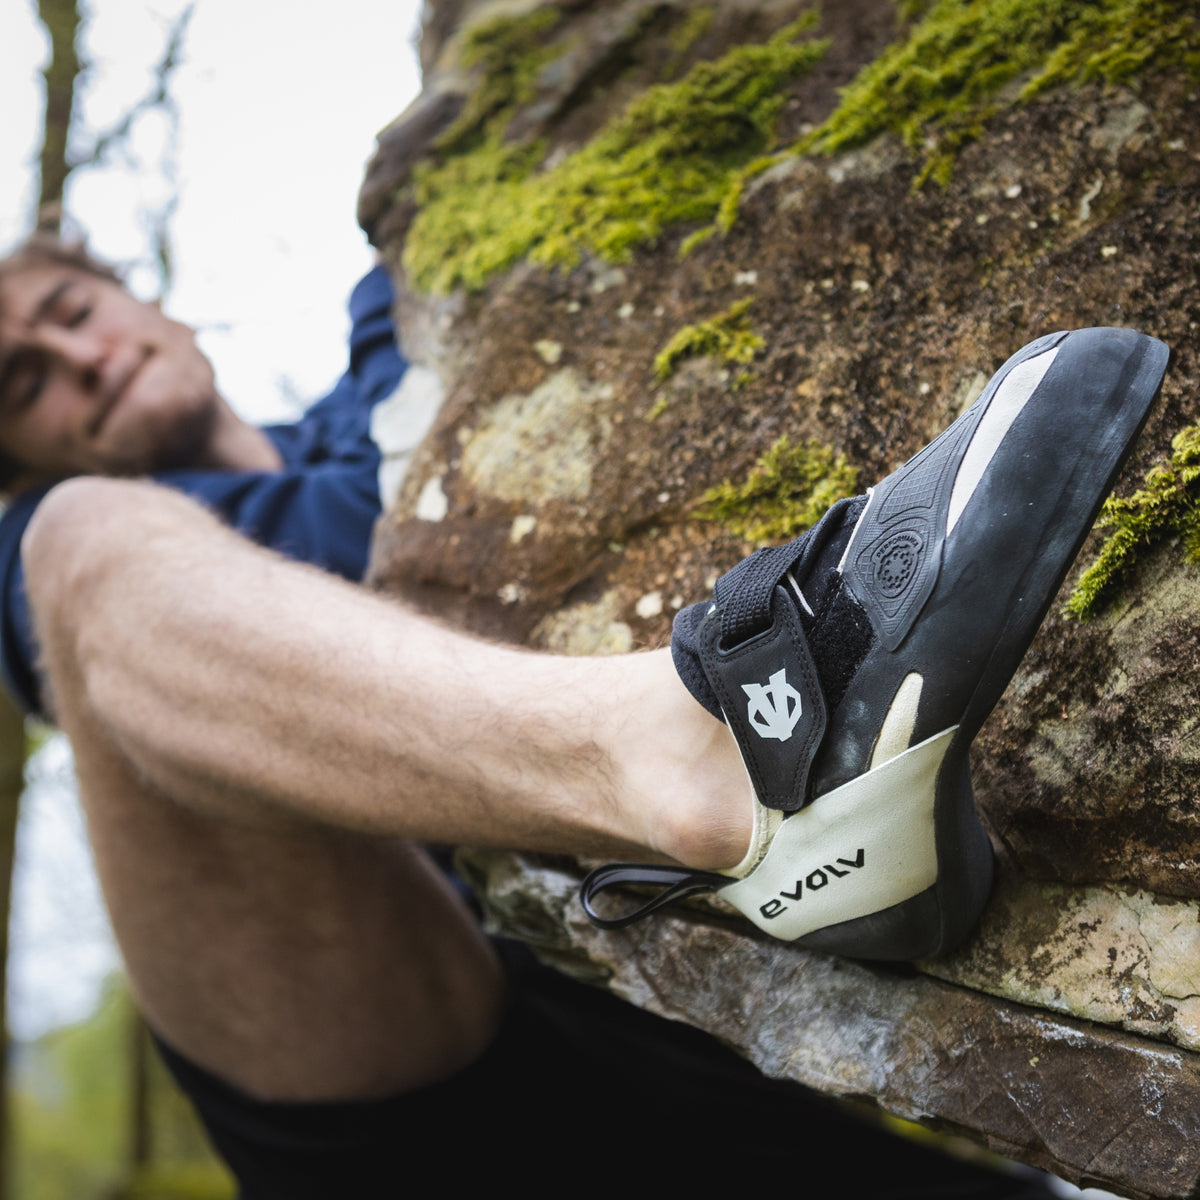 Evolv V6 climbing shoes in use climbing outside on real rock